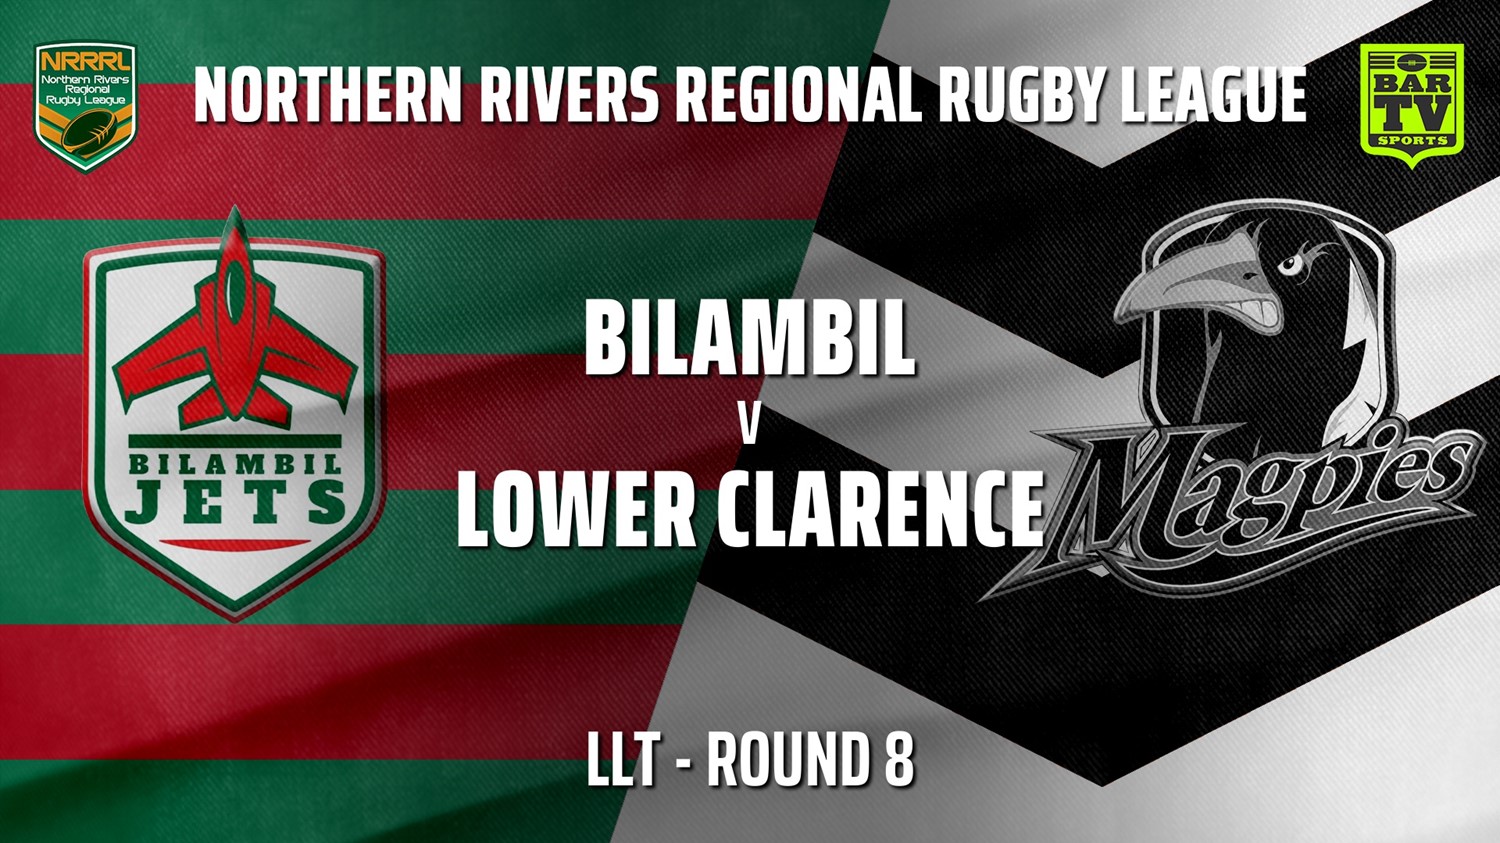 210627-Northern Rivers Round 8 - LLT - Bilambil Jets v Lower Clarence Magpies Slate Image